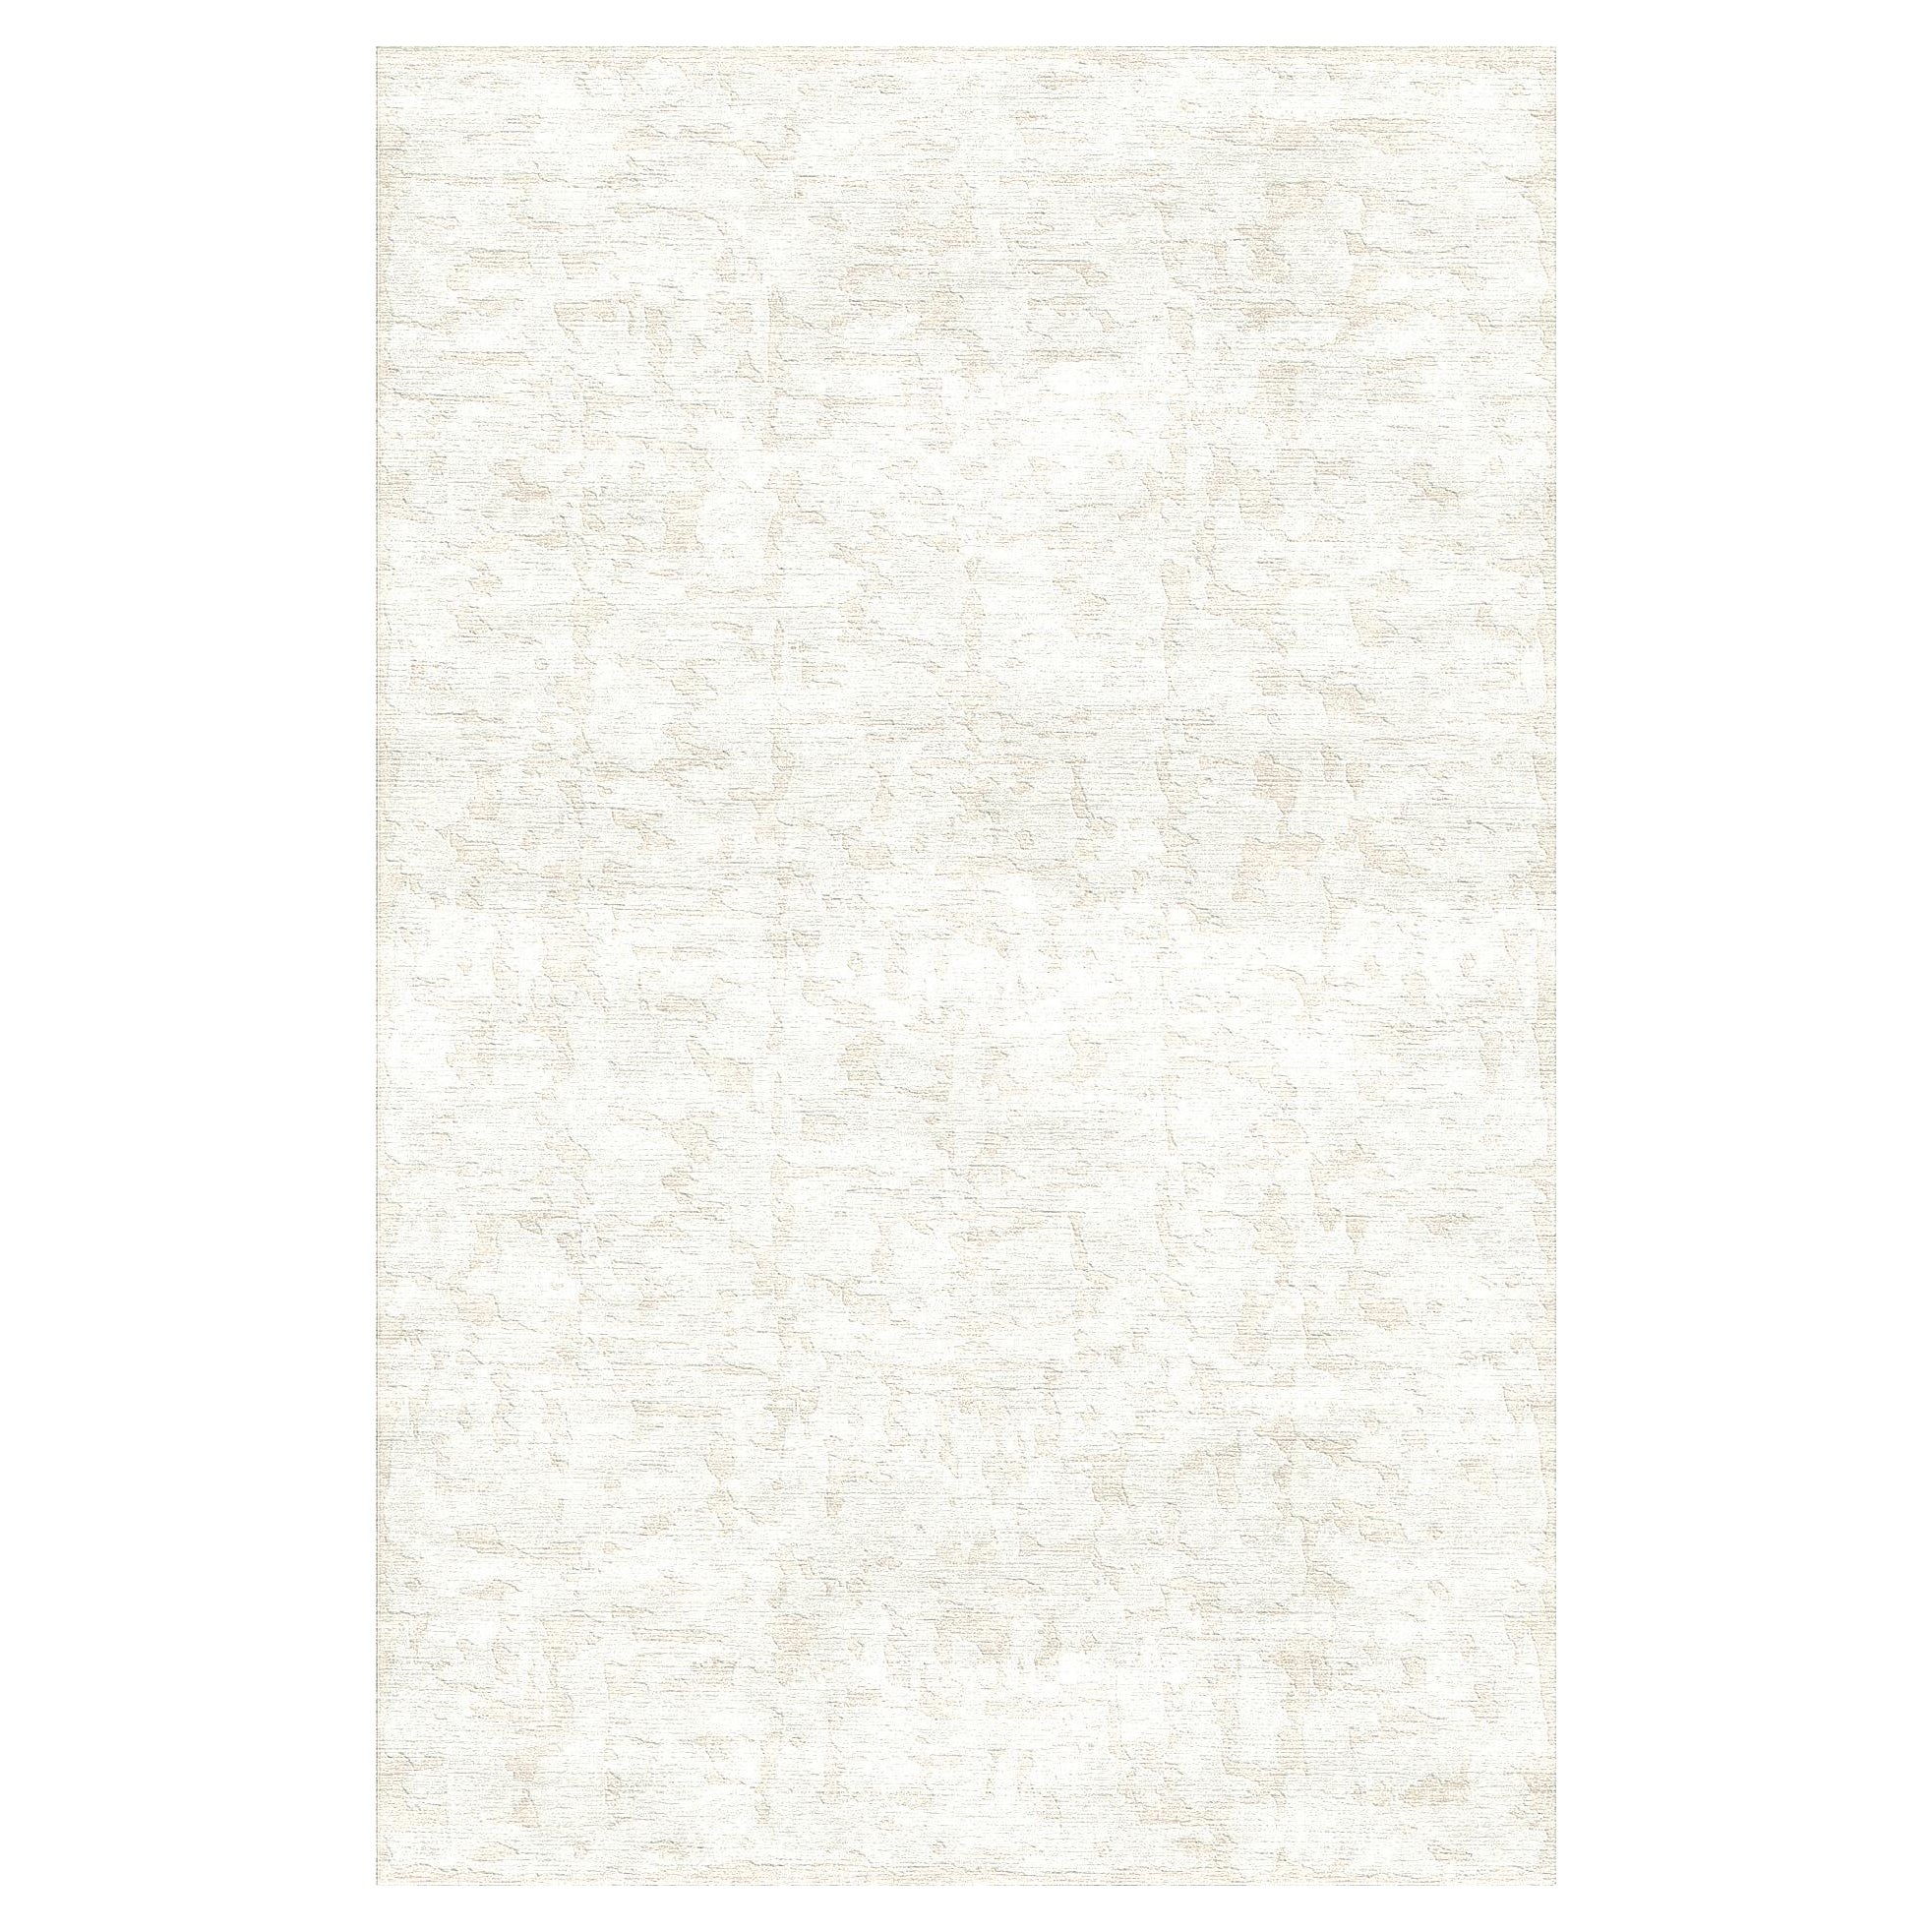 Contemporary Area Rug in White Handmade of 100% Wool "Rio" Large